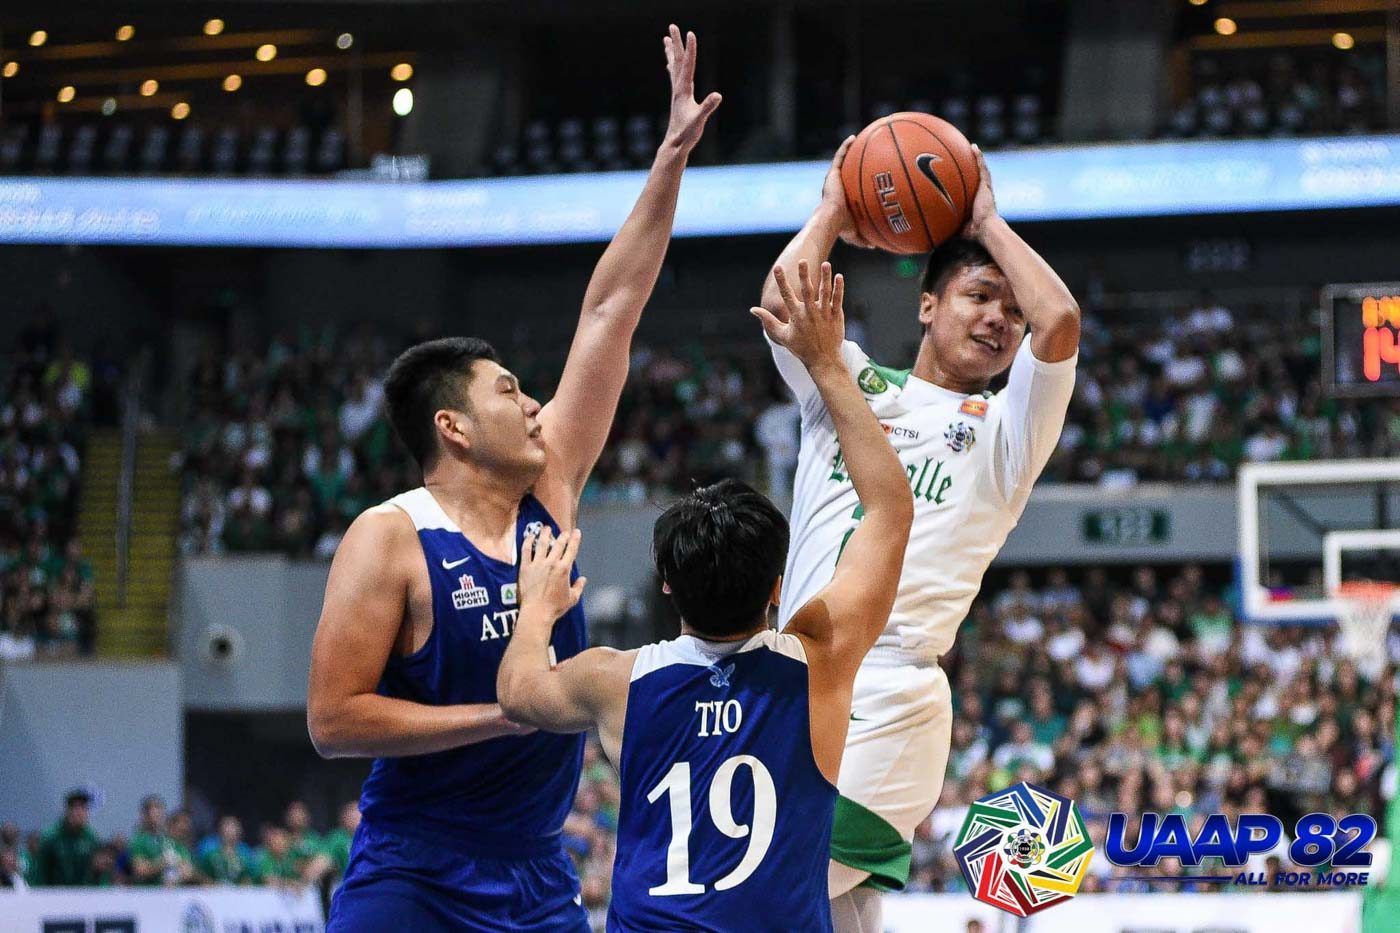 READY TO CHALLENGE. La Salle keeps pace with Ateneo early with guys like Encho Serrano – who scatters 15 points, 8 rebounds, and 2 steals – stepping up in key stretches. Photo release  